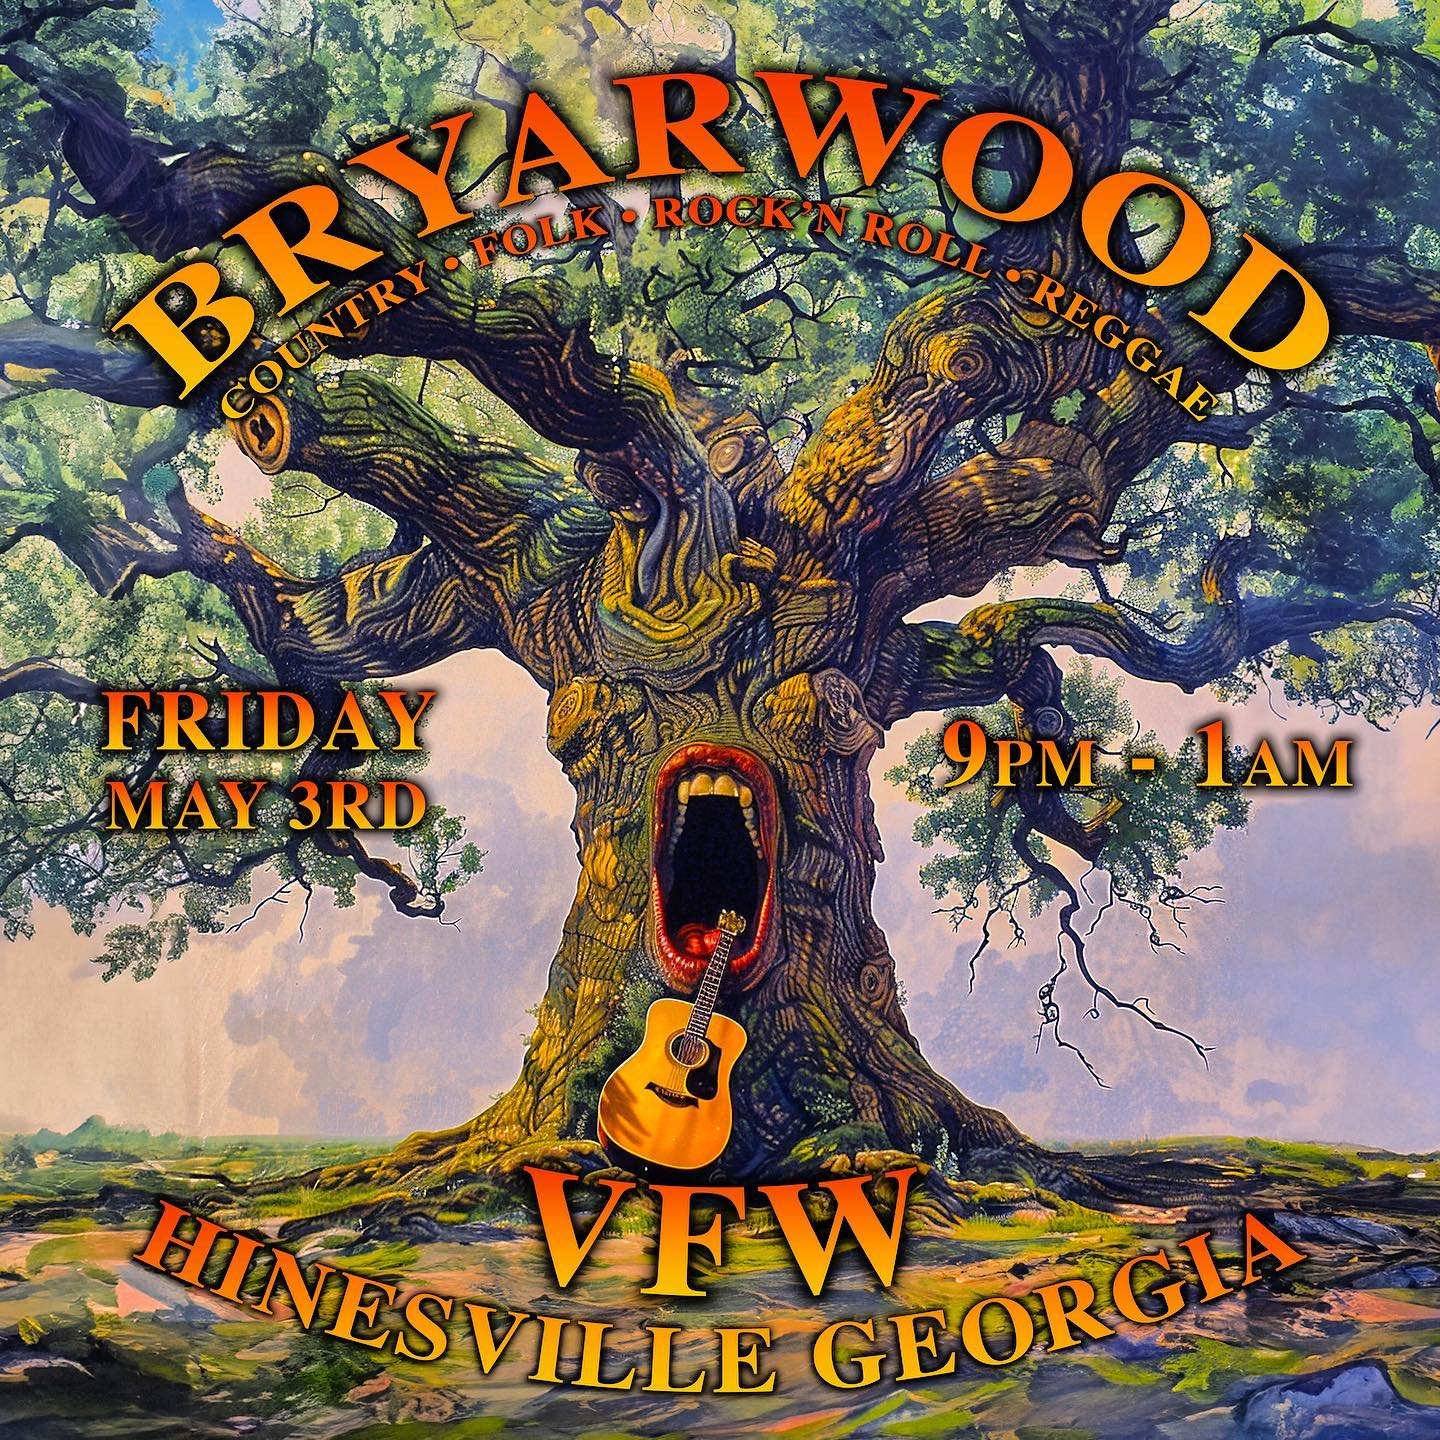 Friday night catch myself and Bryarwood in #hinesvillega at the VFW #livemusic #music #musicians